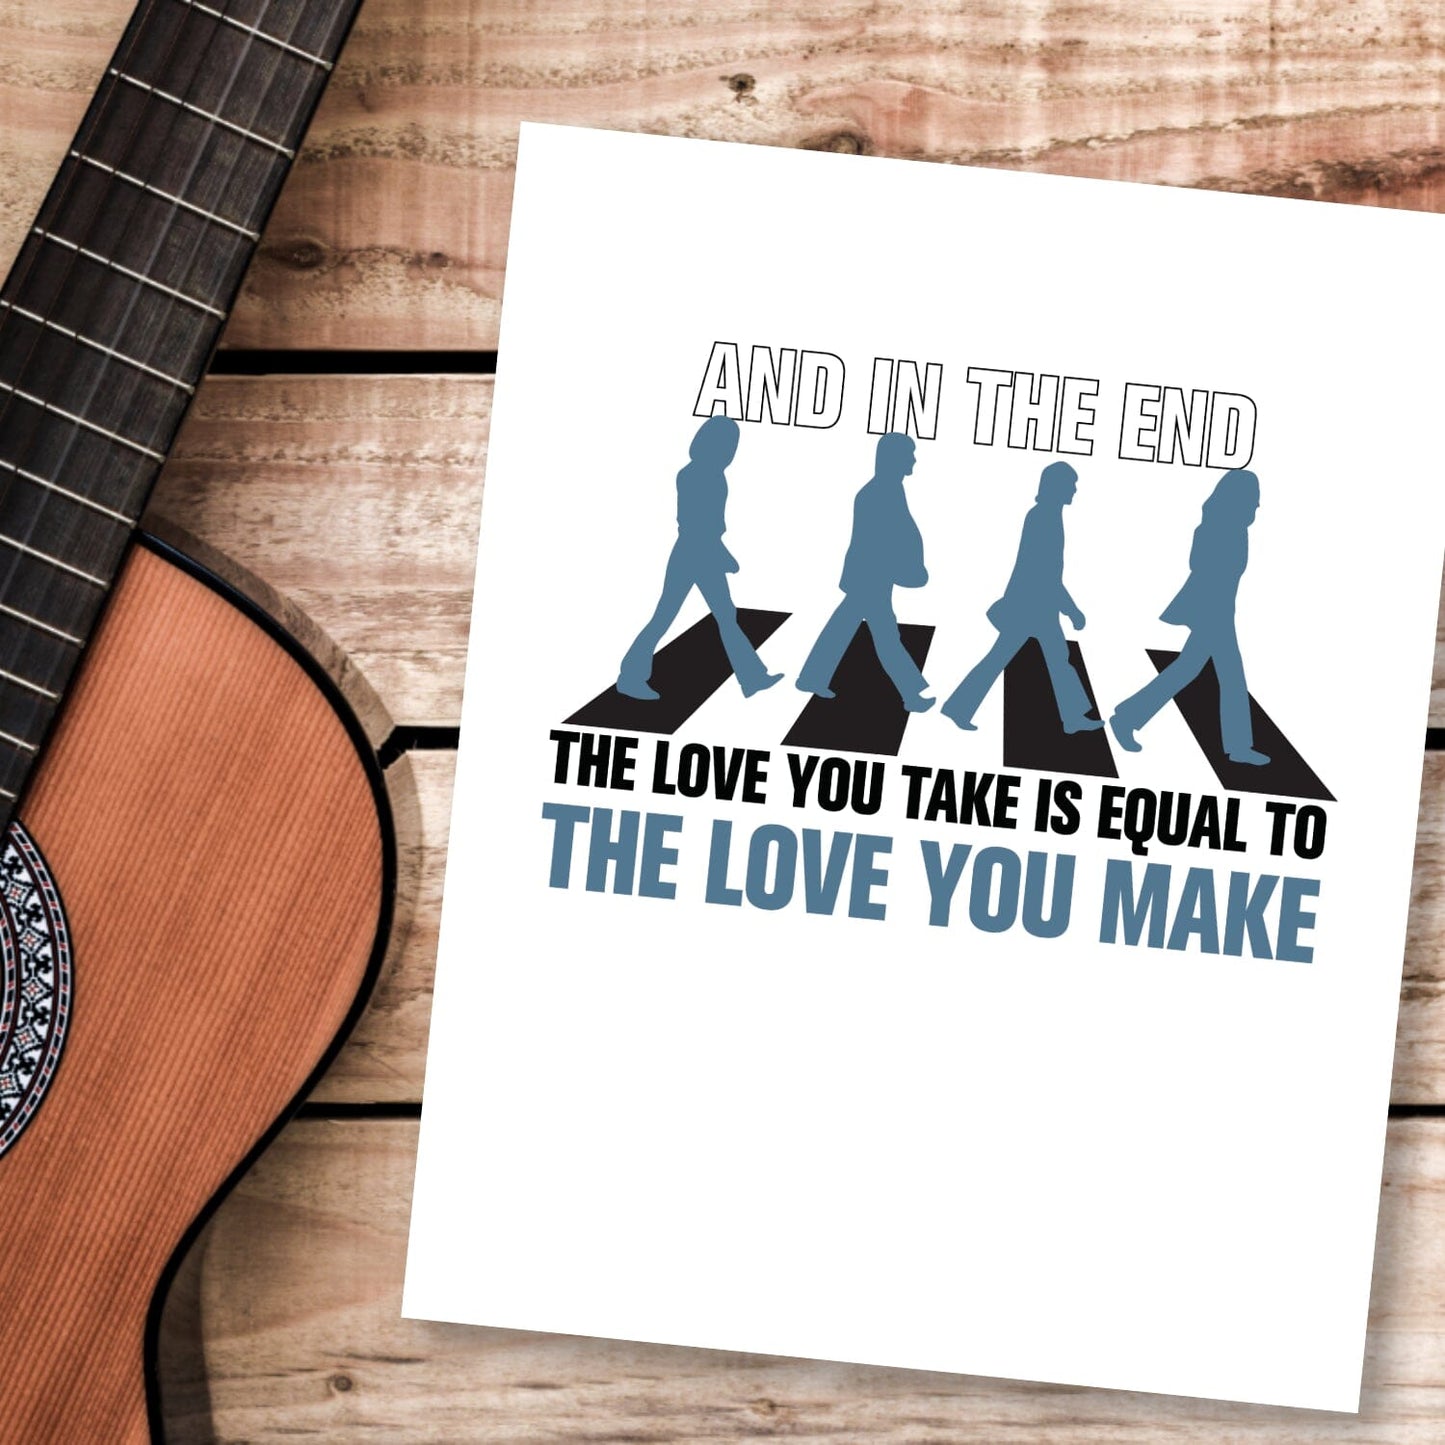 The End by the Beatles - Song Lyric Music Poster Art Print Song Lyrics Art Song Lyrics Art 8x10 Unframed Print 